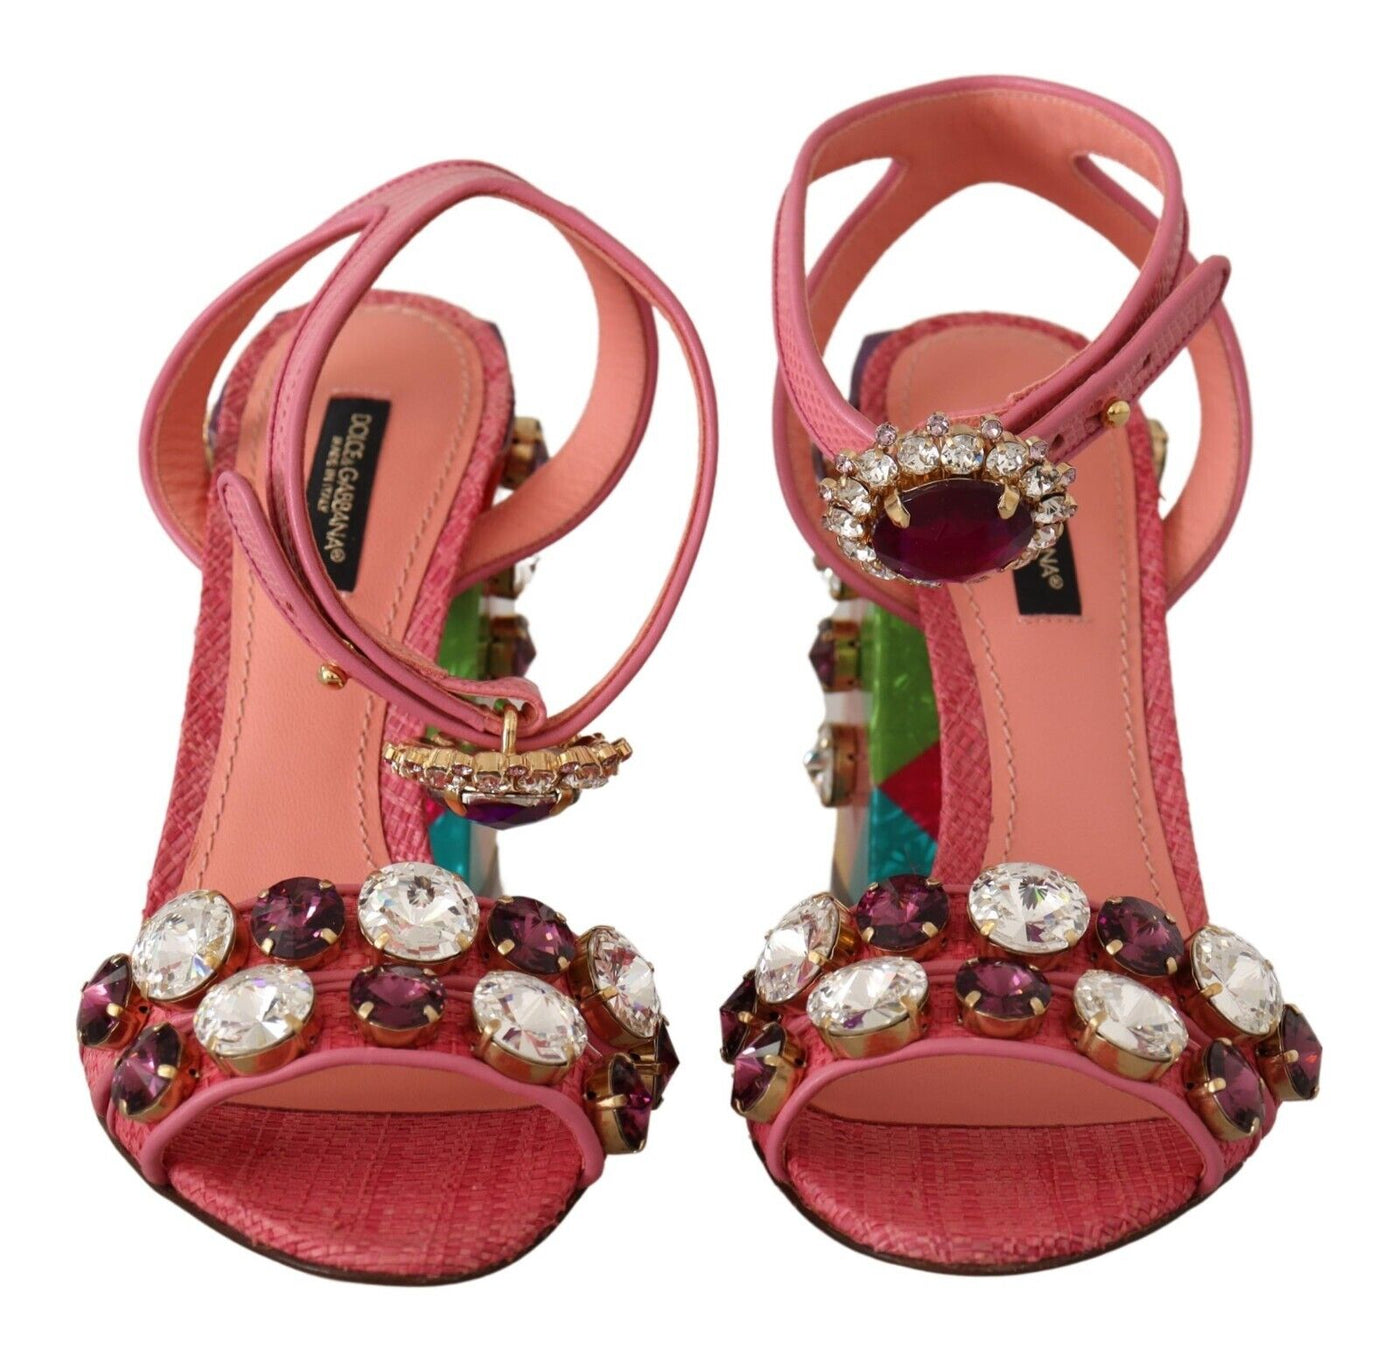 Pink Leather Crystal Block Heels Sandals Shoes